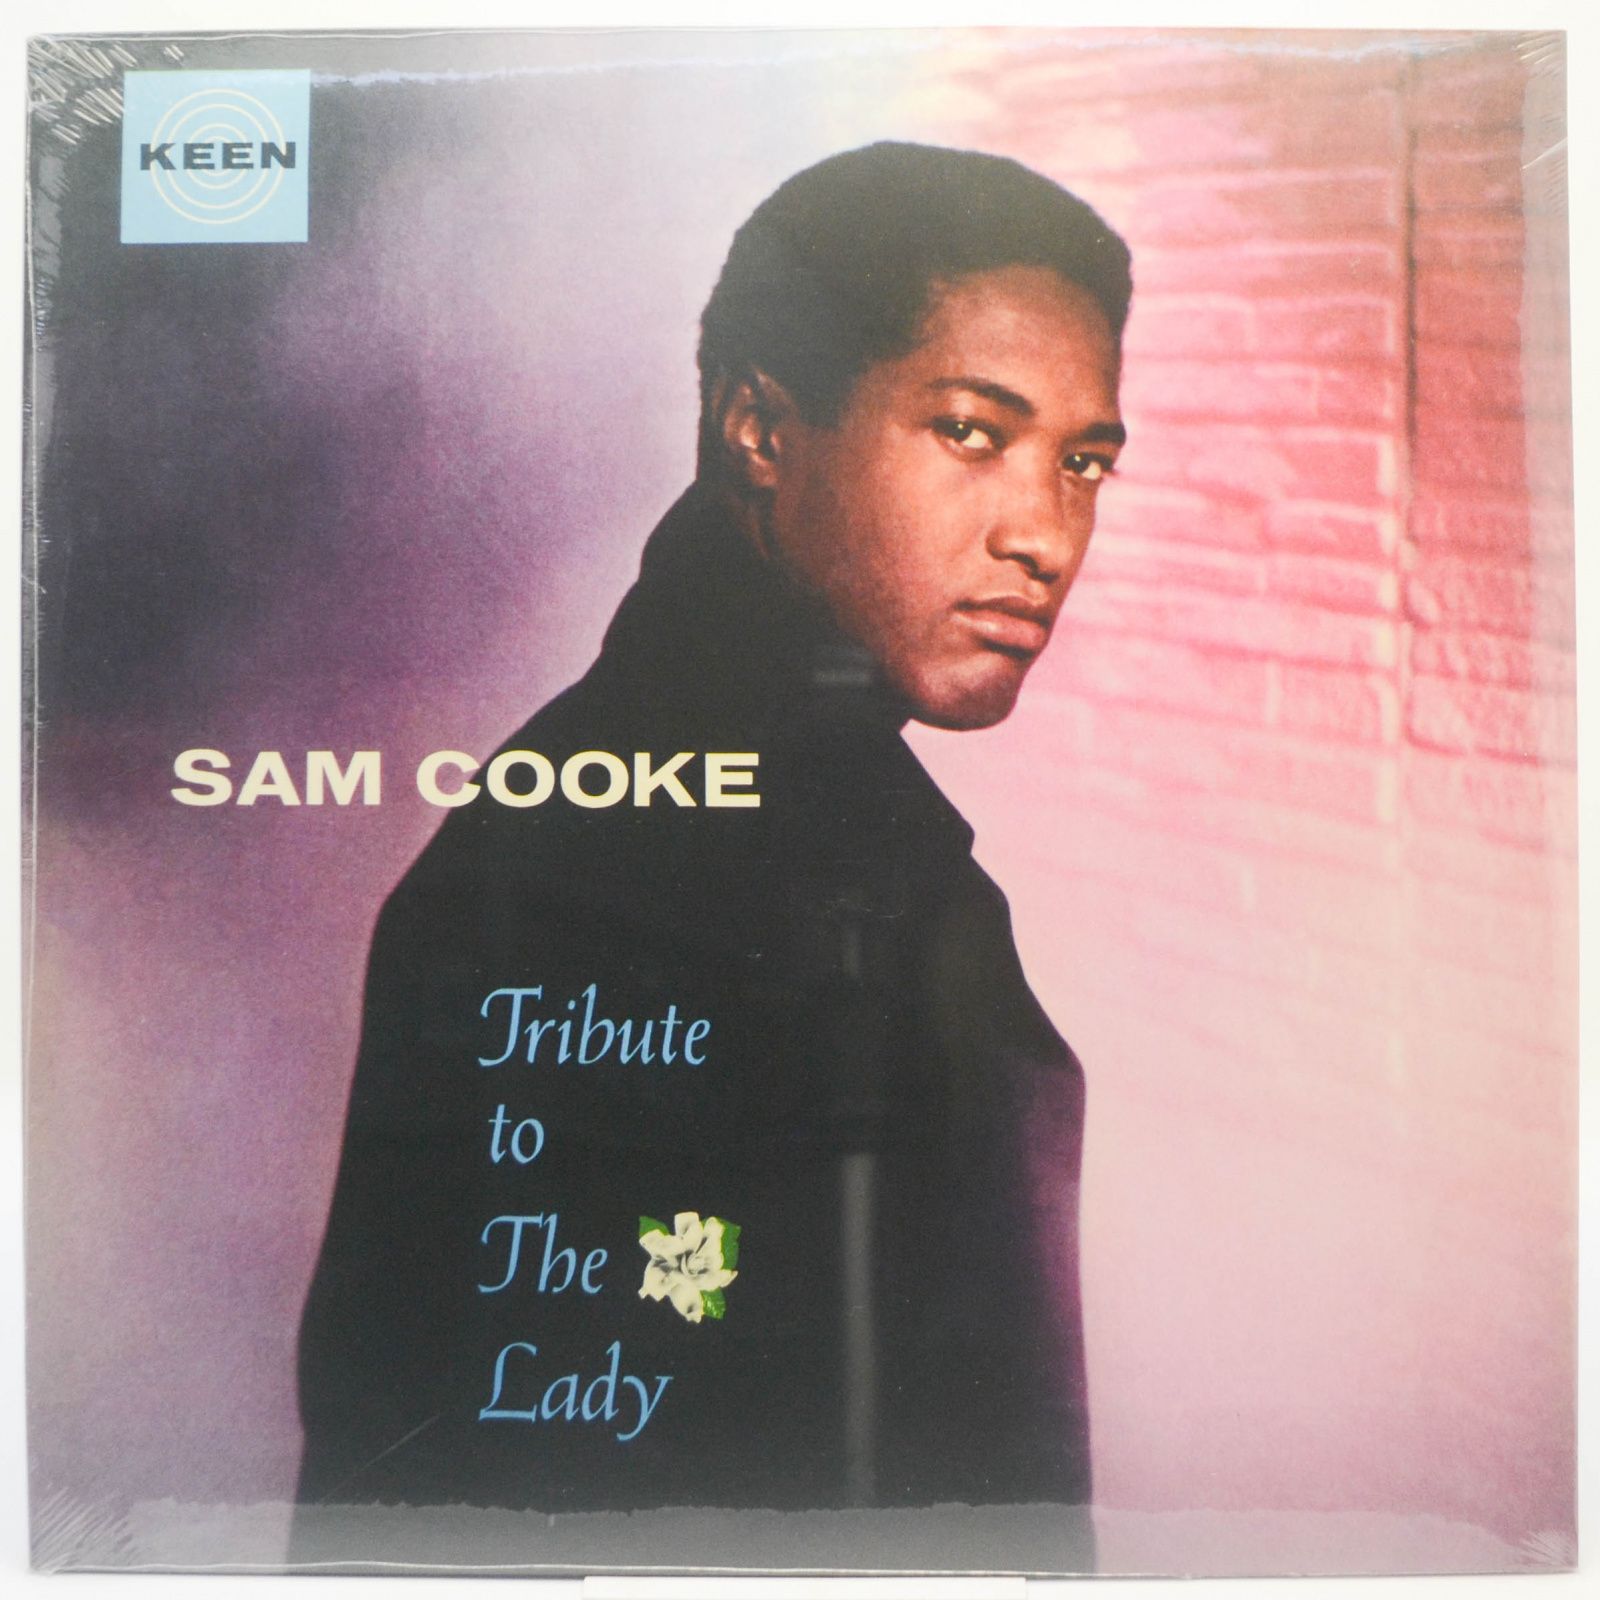 Sam Cooke — Tribute To The Lady, 2020